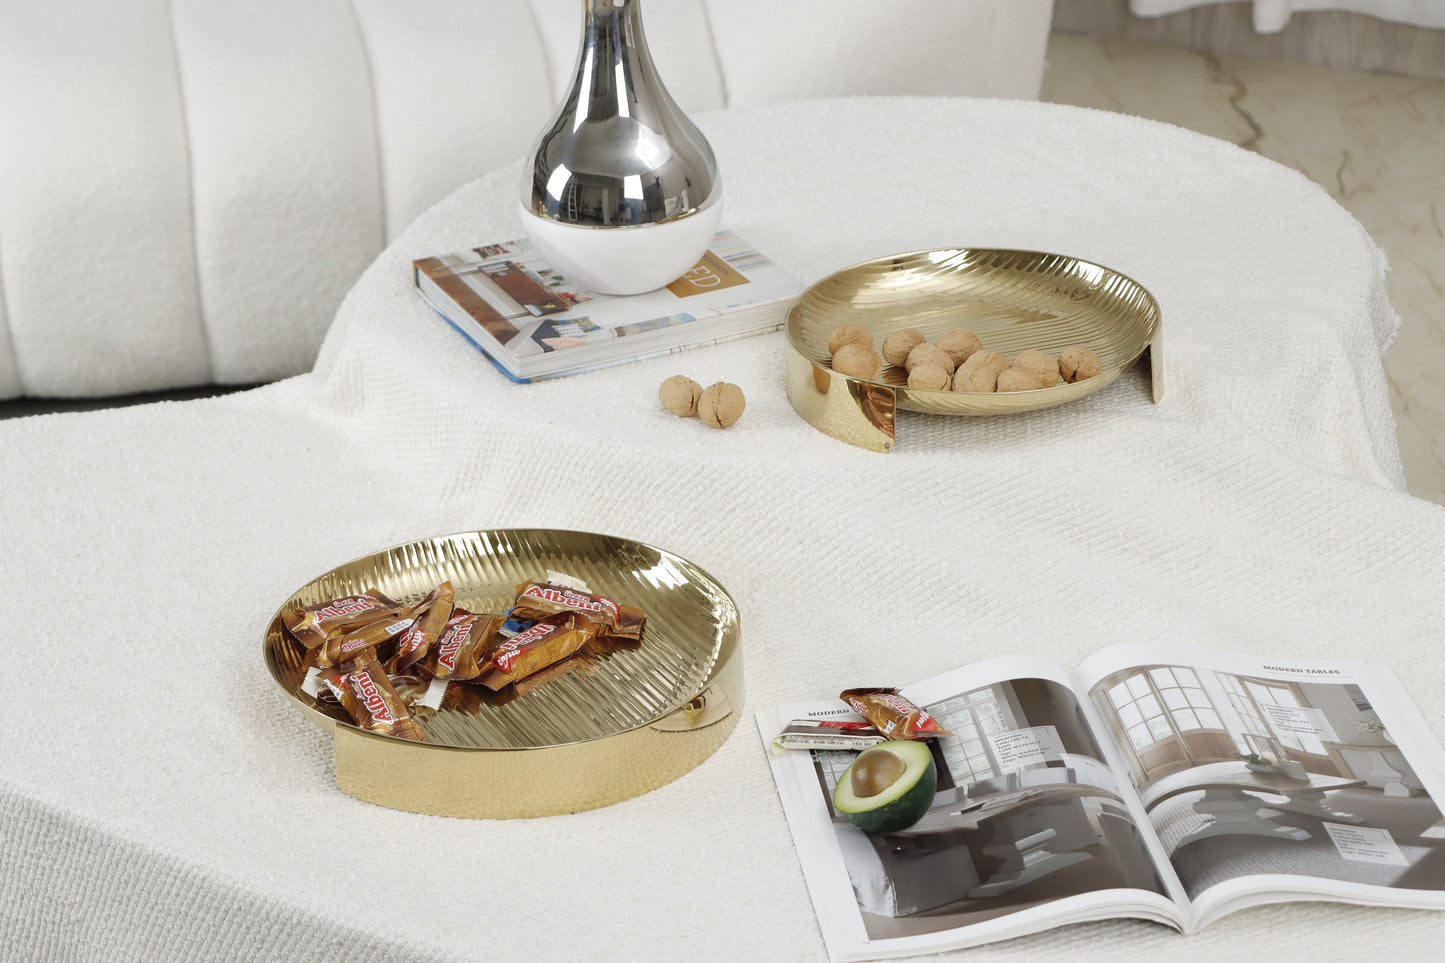 Gold S/S Steel Serving Tray